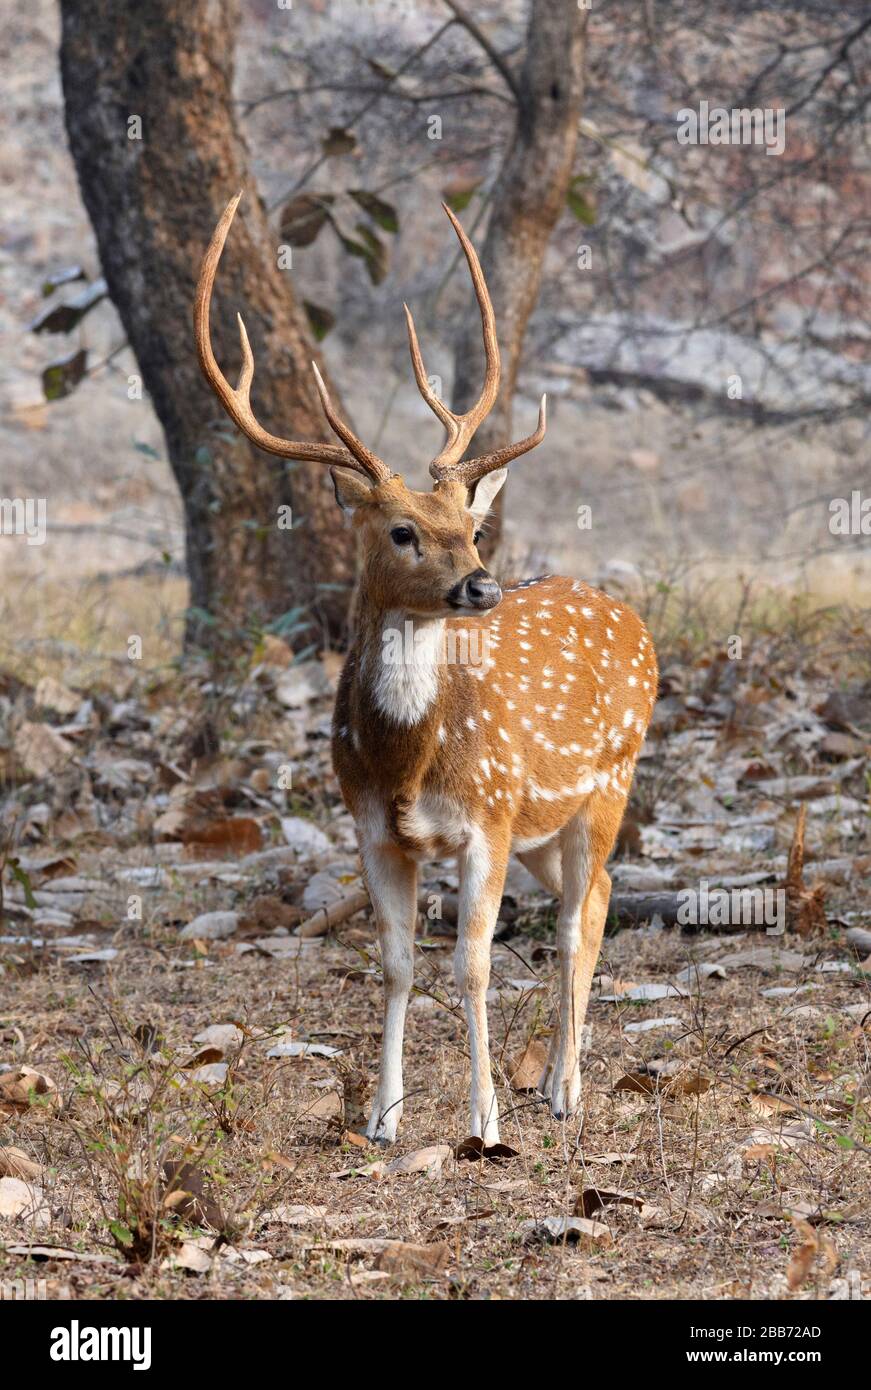 Male Chital (asse assi) nel Parco Nazionale di Ranthambore, Rajasthan, India Foto Stock